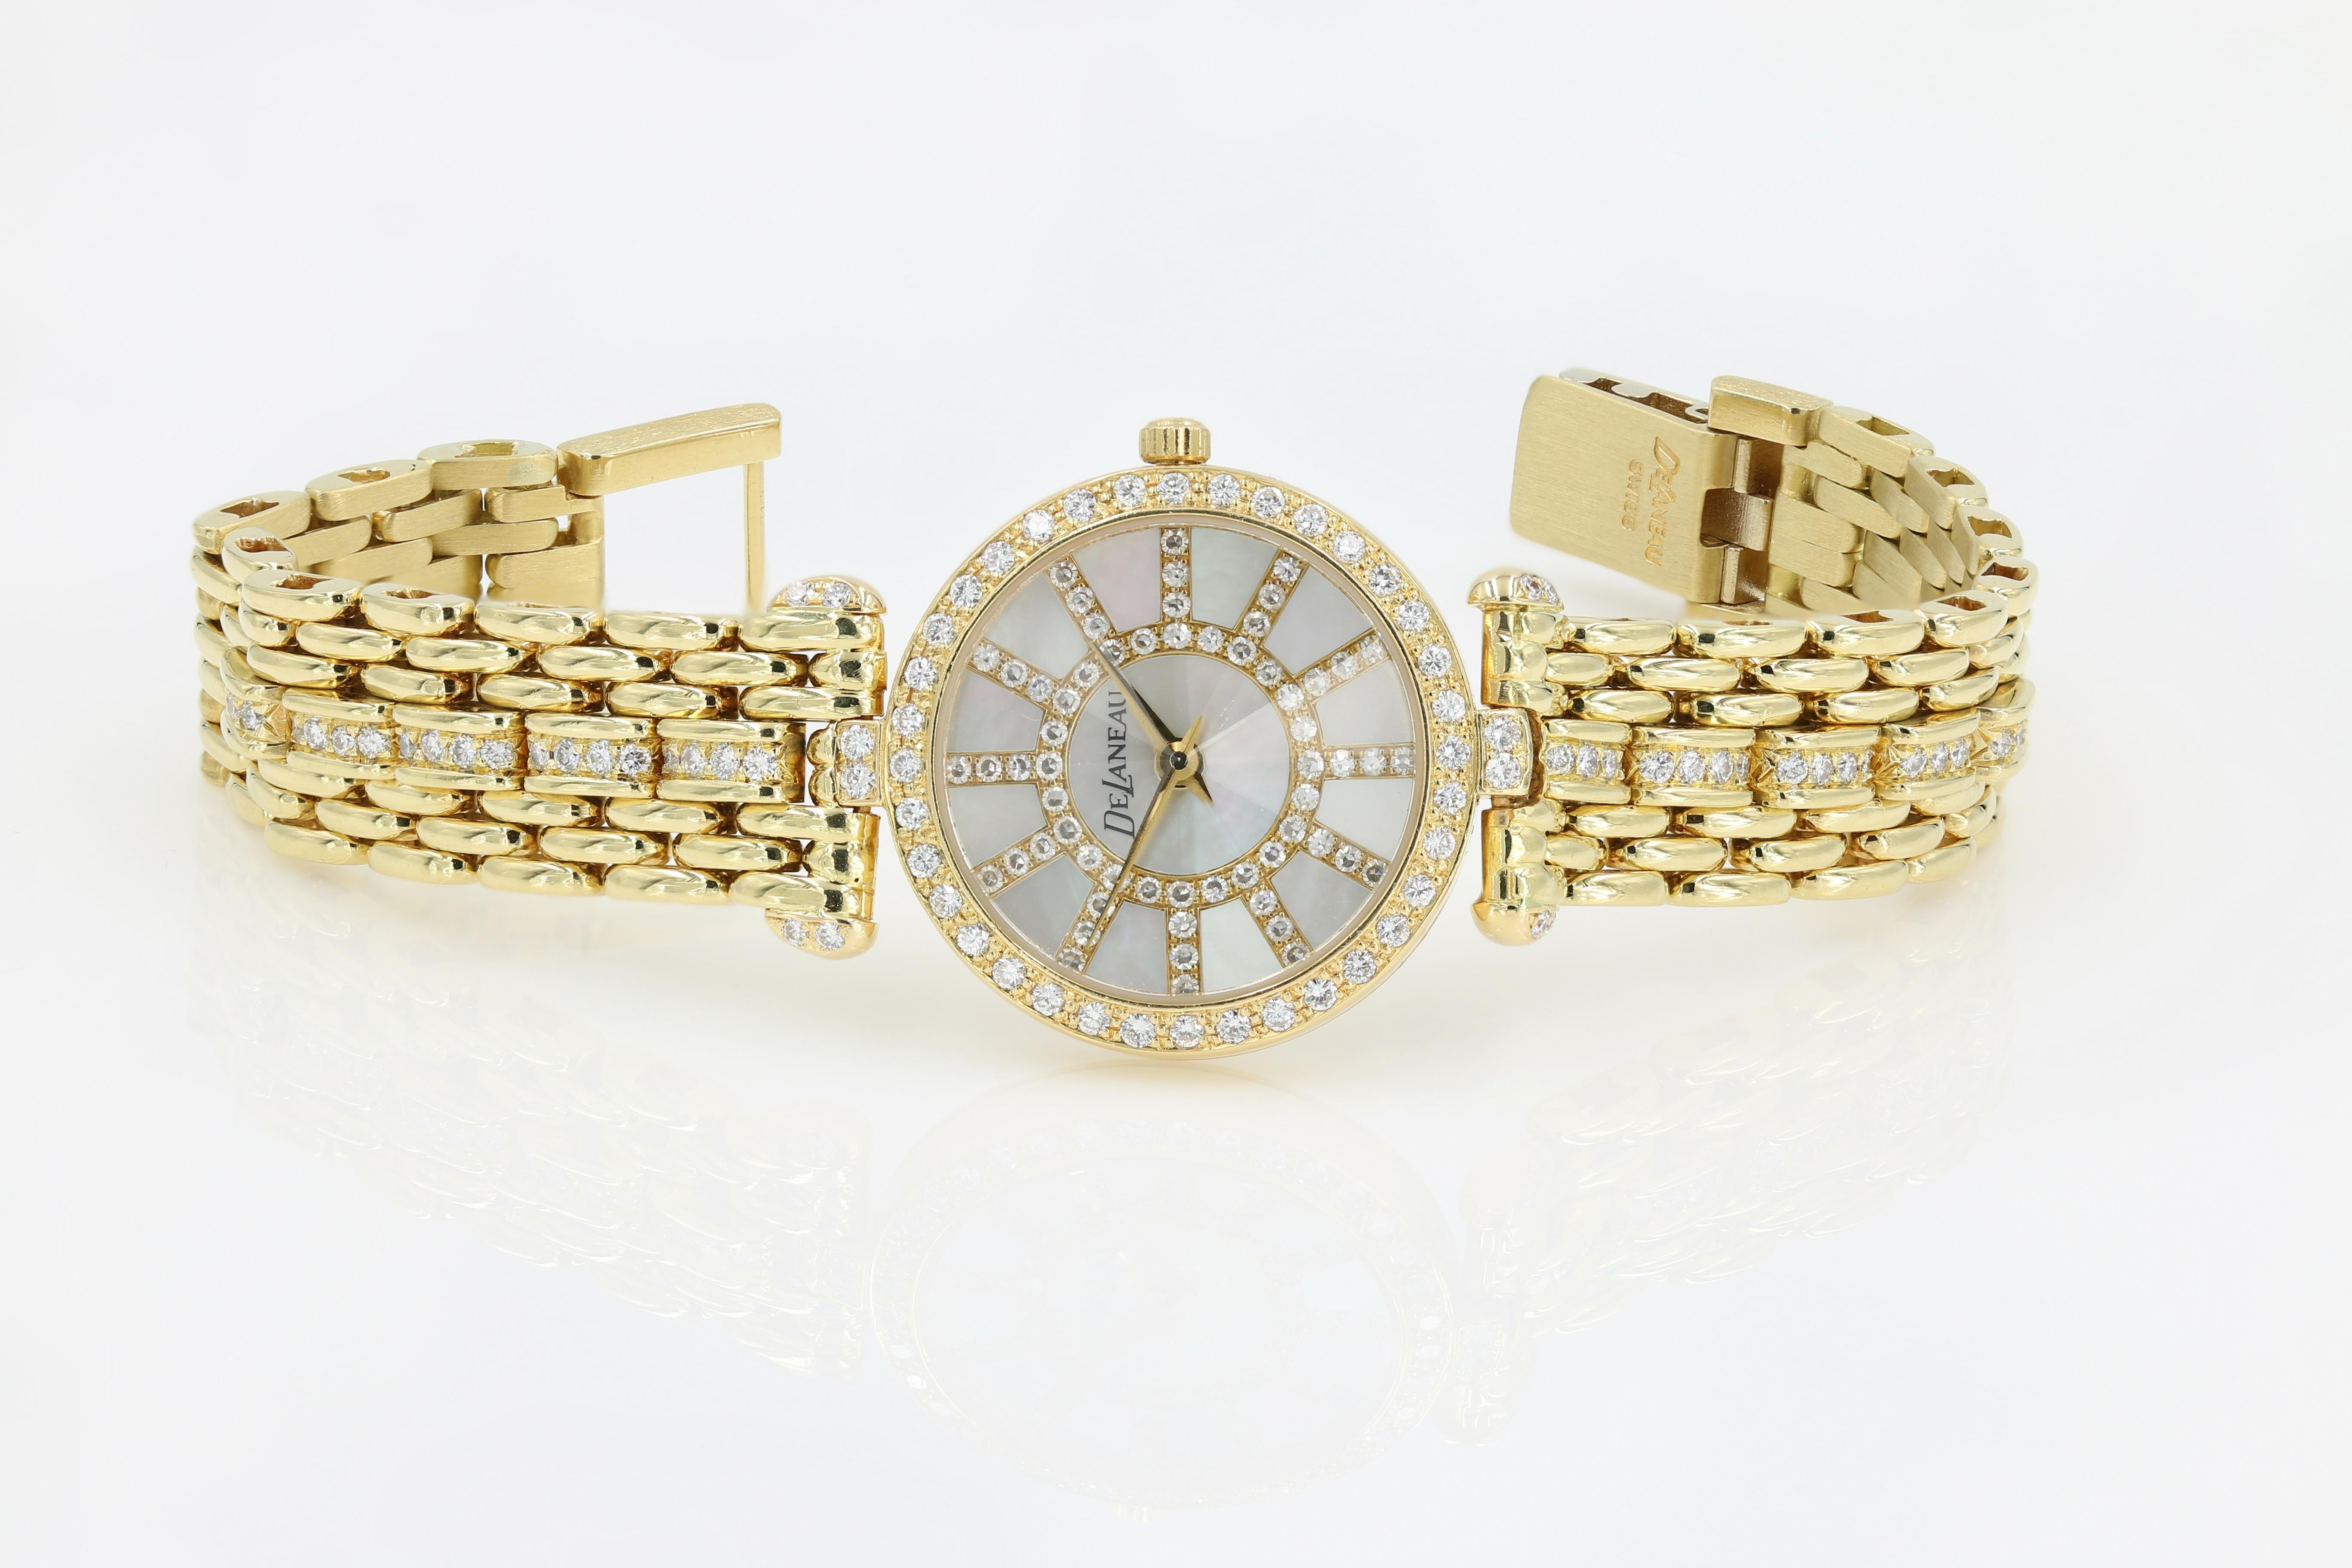 DeLaneau 18kt Yellow Gold & Diamond Bracelet Watch w/Faceted Crystal & MOP Dial - (Pre-owned - recently serviced and in excellent condition) - Lady’s DeLaneau l8kt. yellow gold Swiss quartz watch.  Mother of Pearl dial with diamond. Diamond bezel